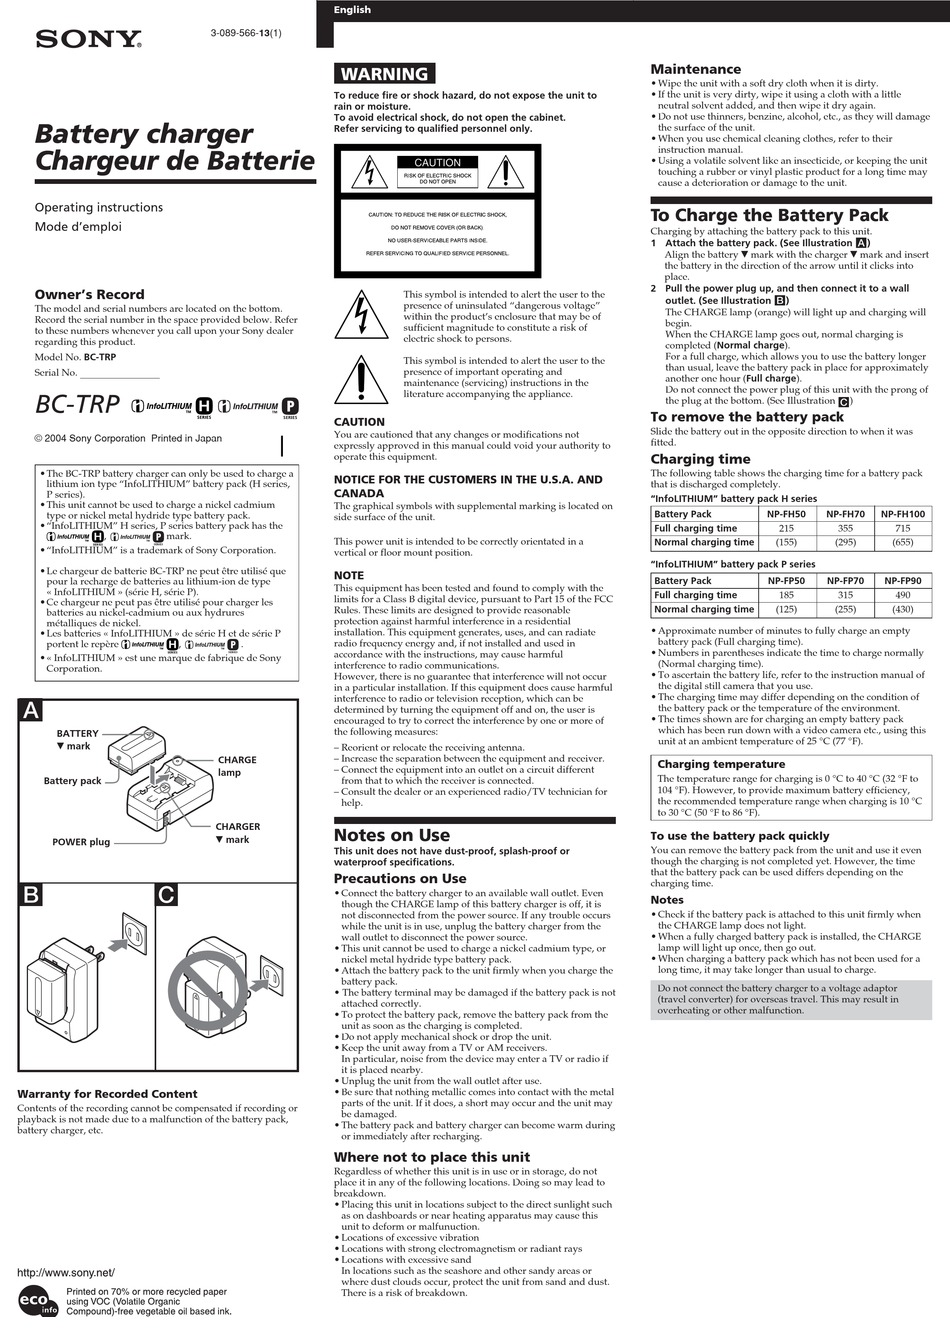 SONY BC-TRP BATTERY CHARGER OPERATING INSTRUCTIONS | ManualsLib